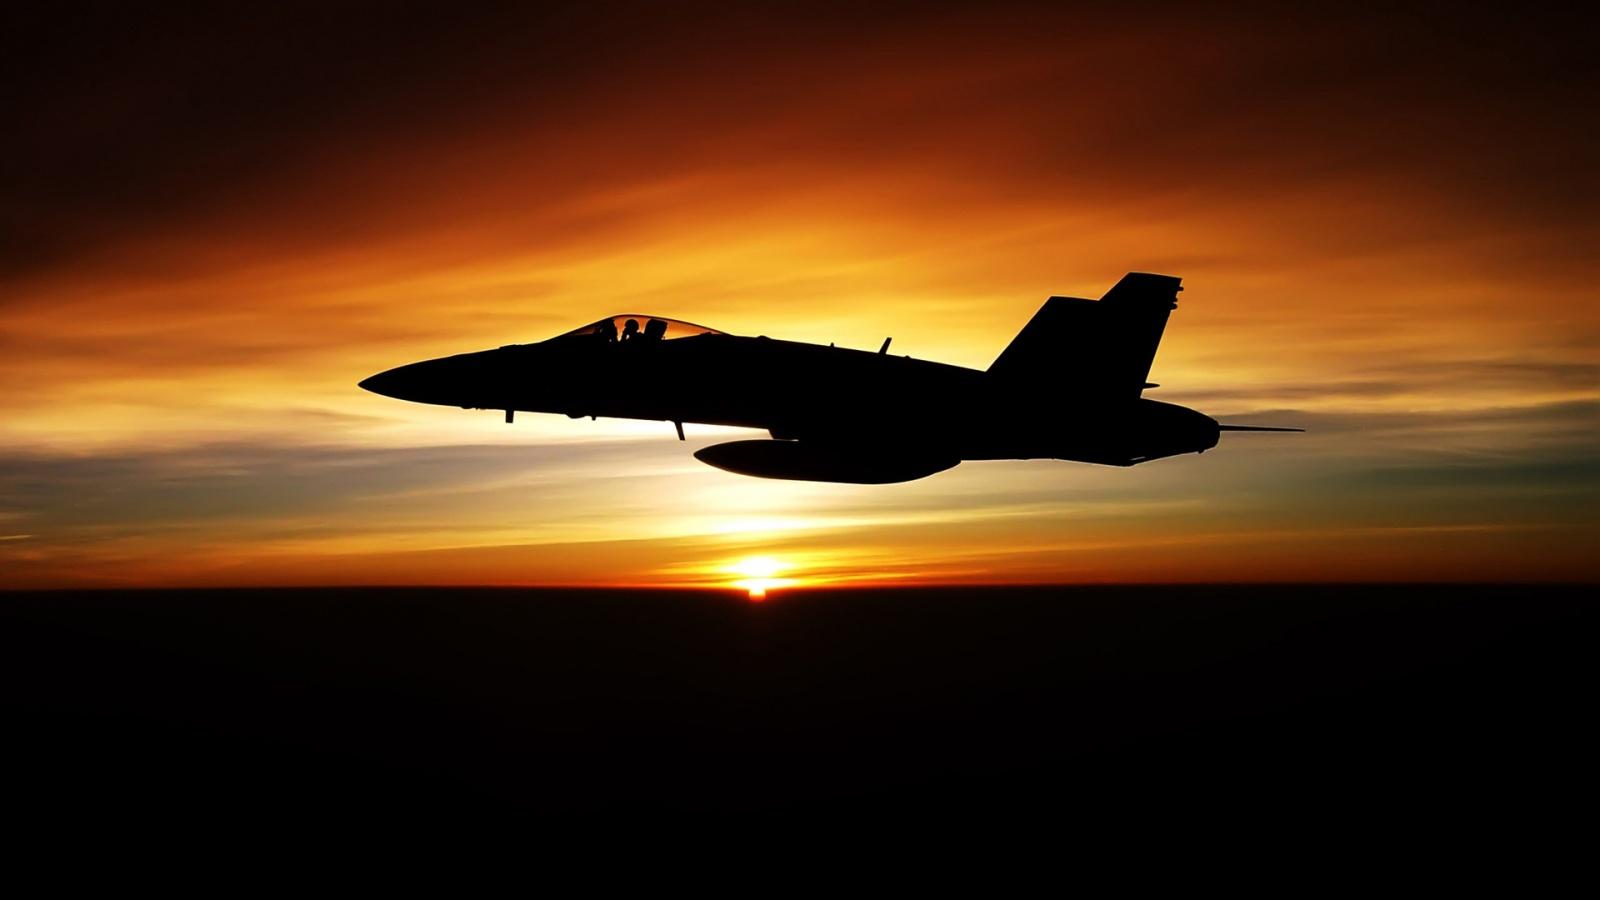 FA 18C Hornet Aircraft Wallpaper in jpg format for free download